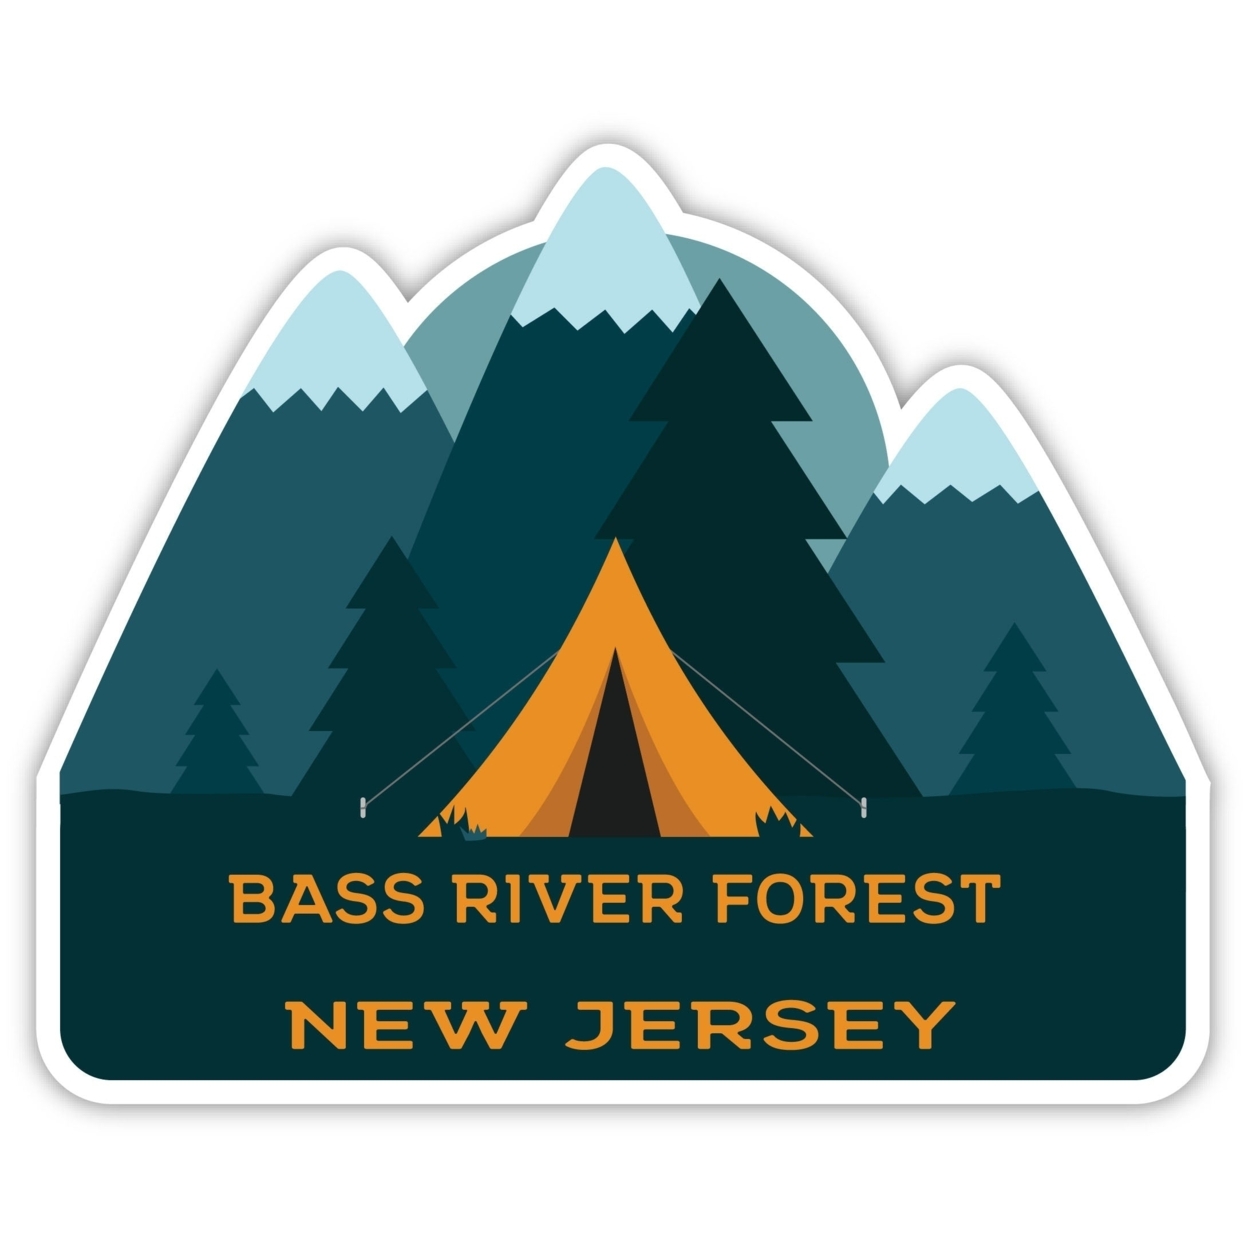 Bass River Forest New Jersey Souvenir Decorative Stickers (Choose Theme And Size) - Single Unit, 8-Inch, Tent